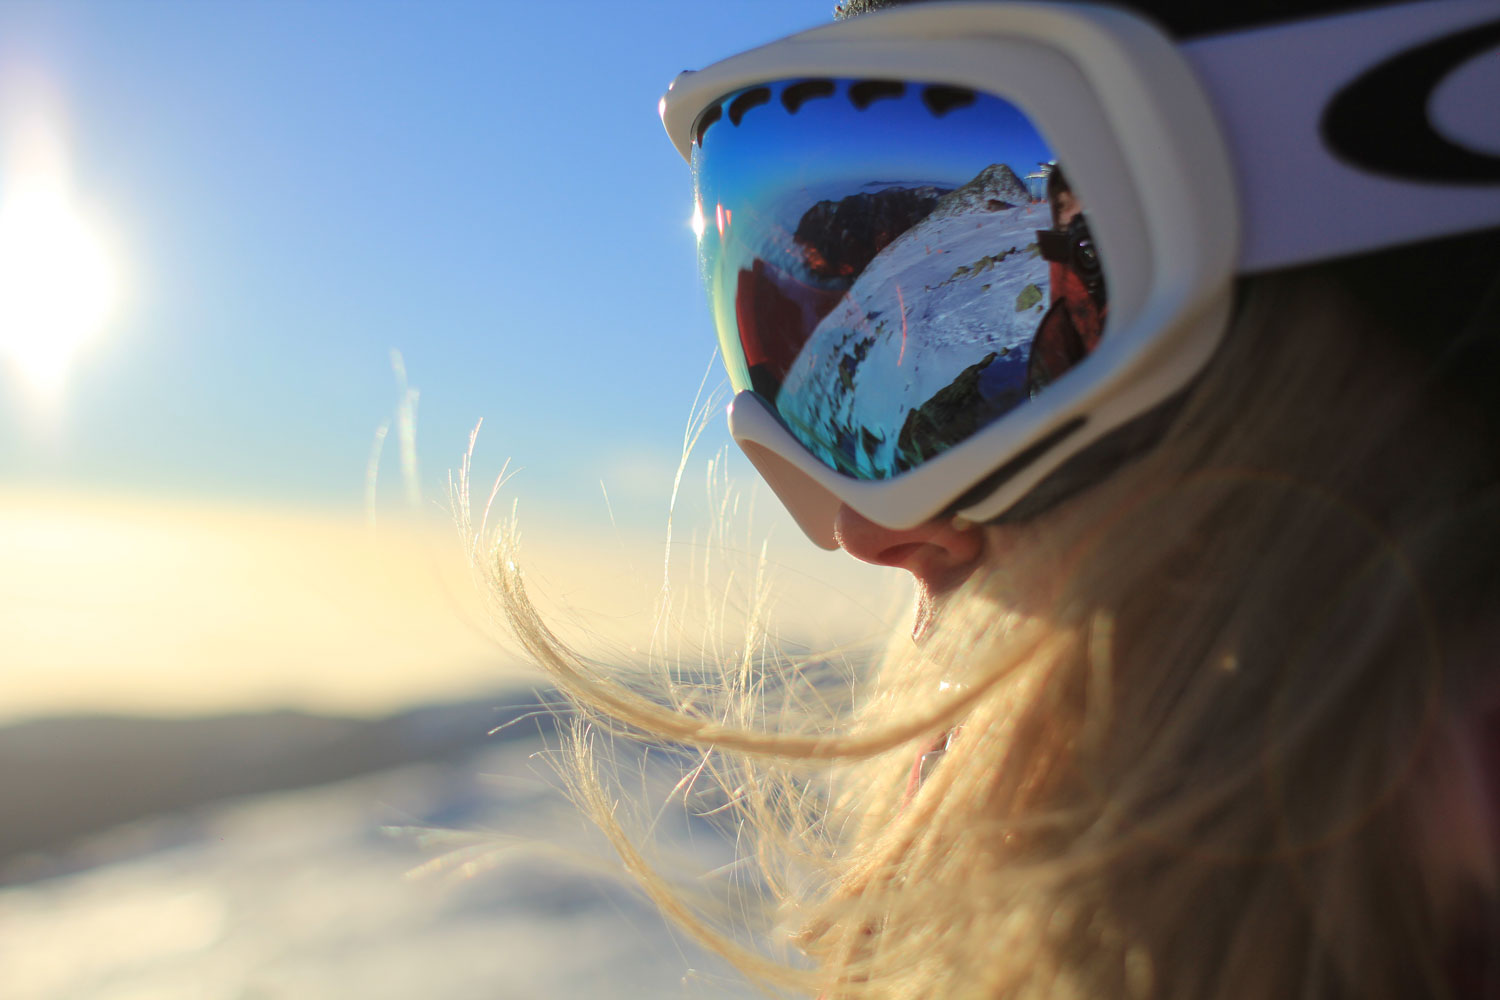 how to choose the perfect snow goggles season 2017/18